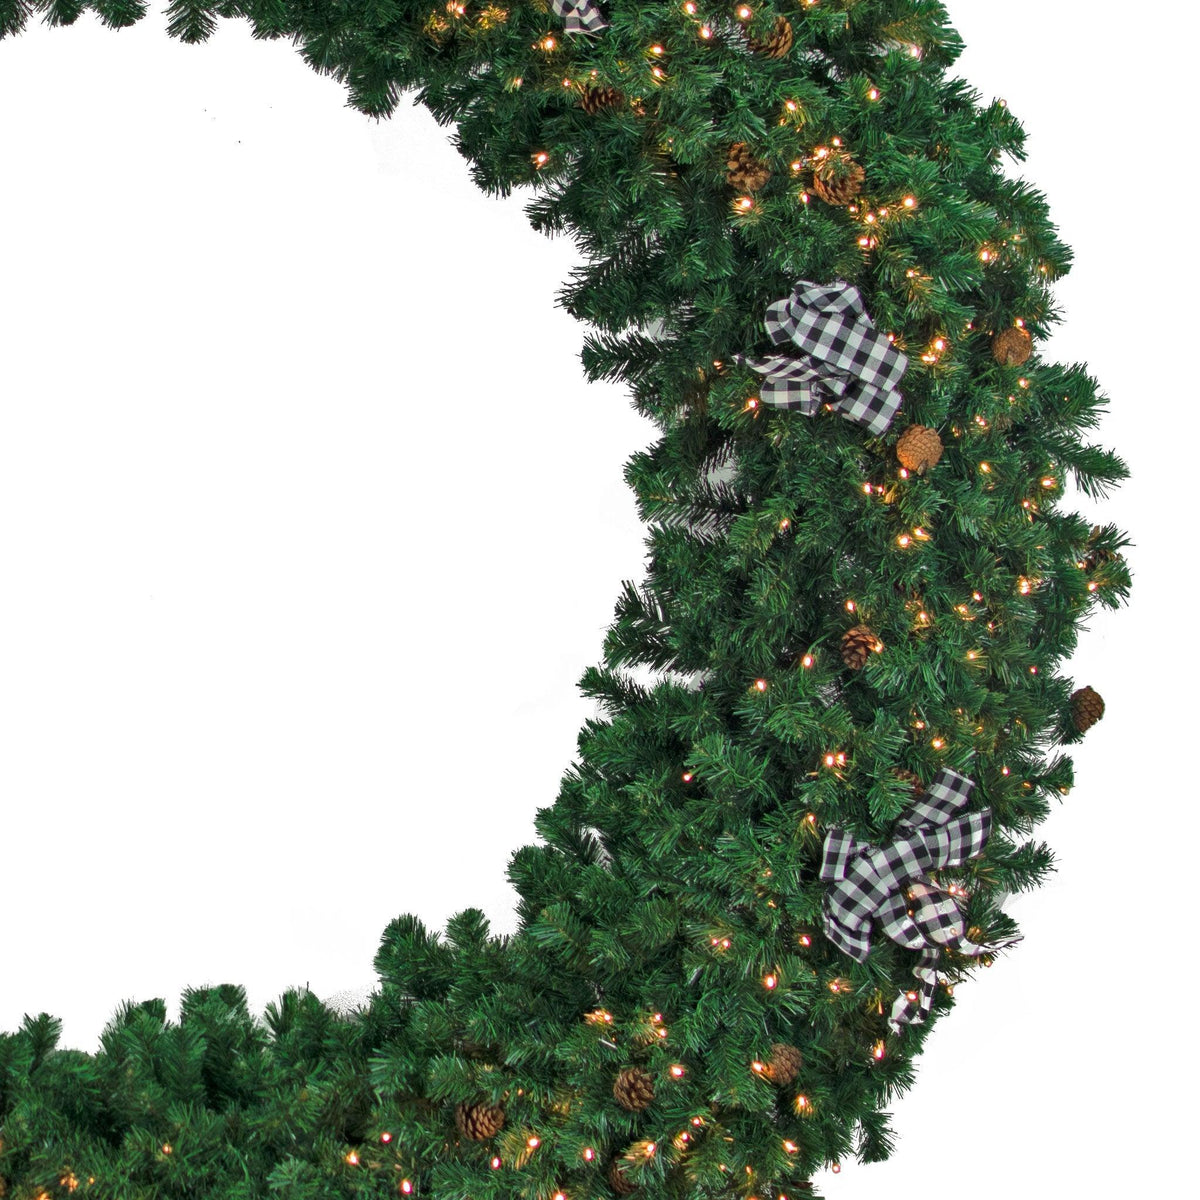 Lee Display's brand new and custom-designed 8FT Pre-Lit Premier Pine Fir Christmas Wreaths available for purchase, rent, and installation services.  Shop now at leedisplay.com